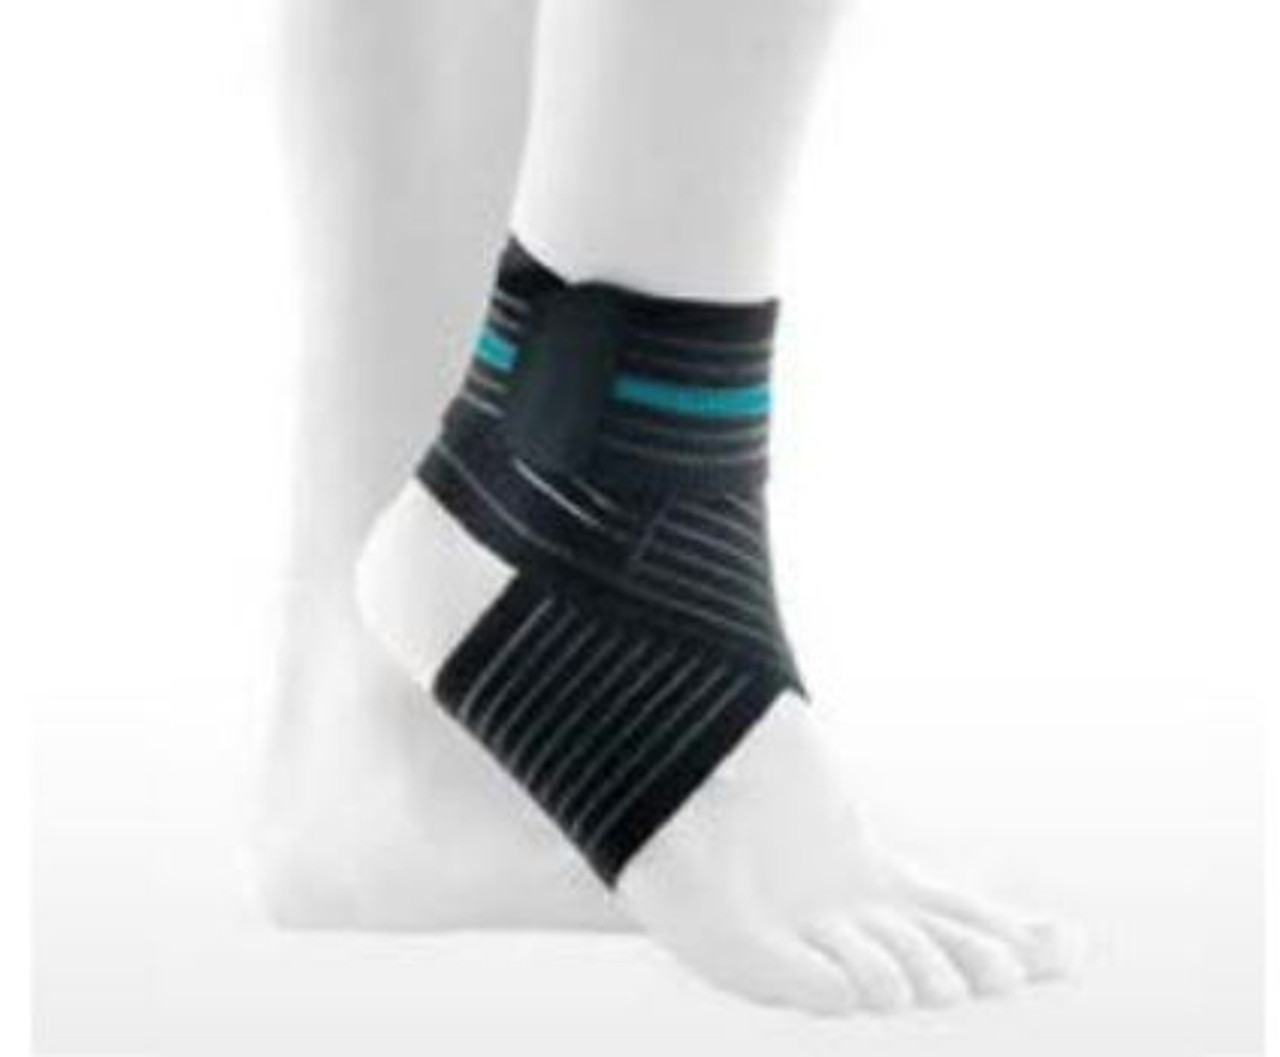 ACE902-LG ACE902 ADJUSTABLE ELASTIC ANKLE SUPPORT - LARGE/3